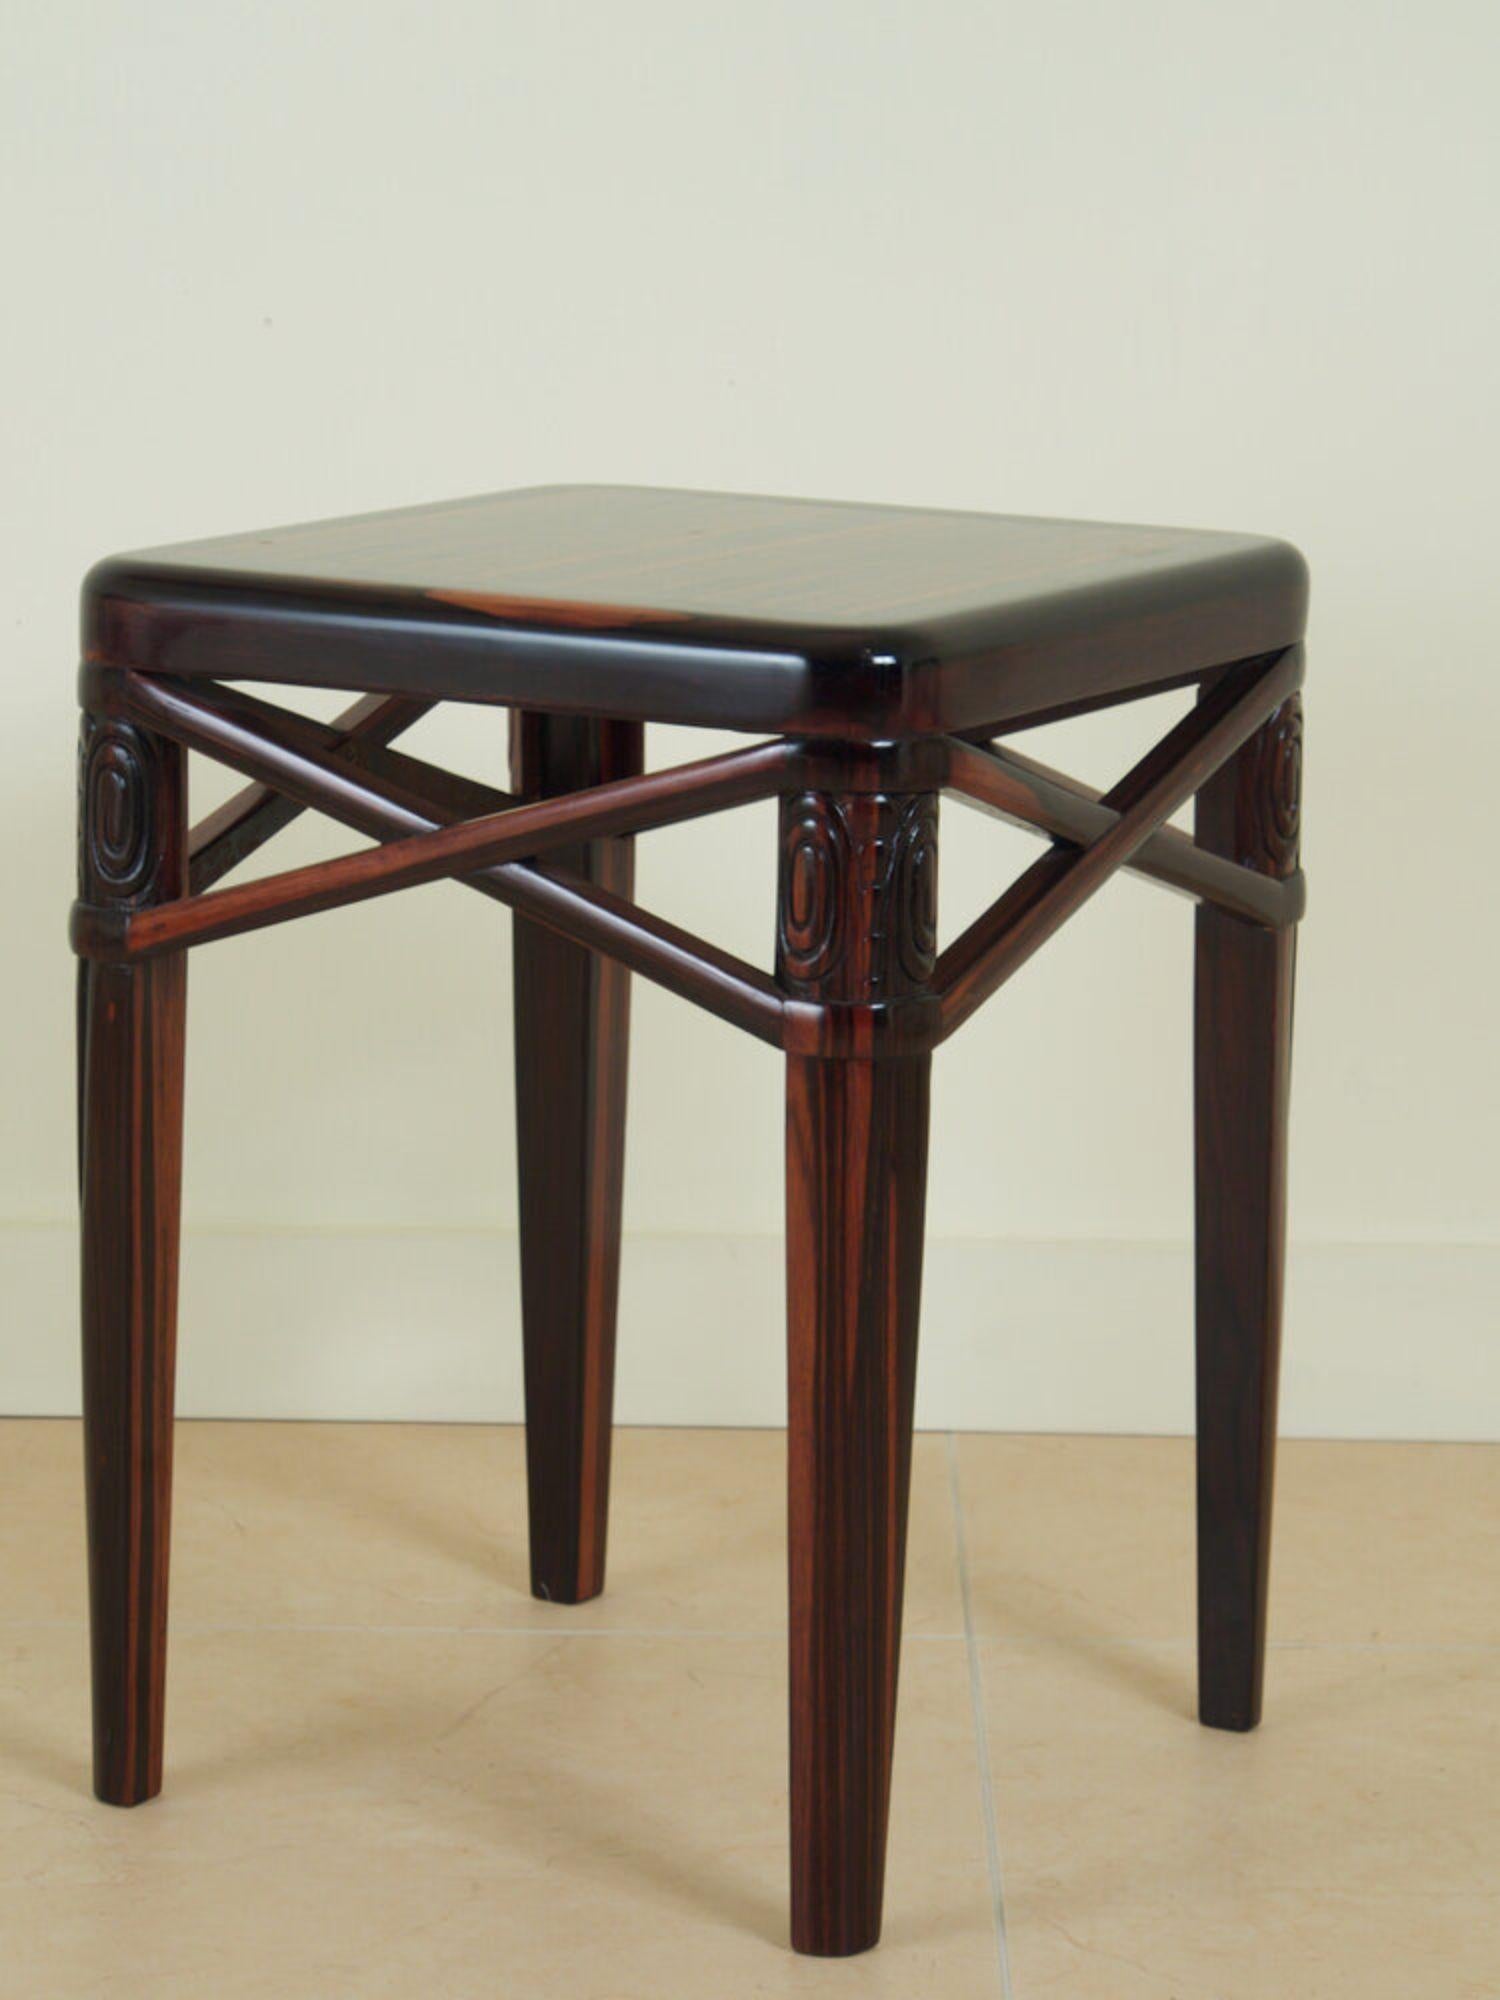 Classic French Art Deco small side table/bench by Ruhlmann, 1925, in solid macassar ebony, with new veneered inset top. This small table was used as a  small bench and istogether with the original inset padded top. 14